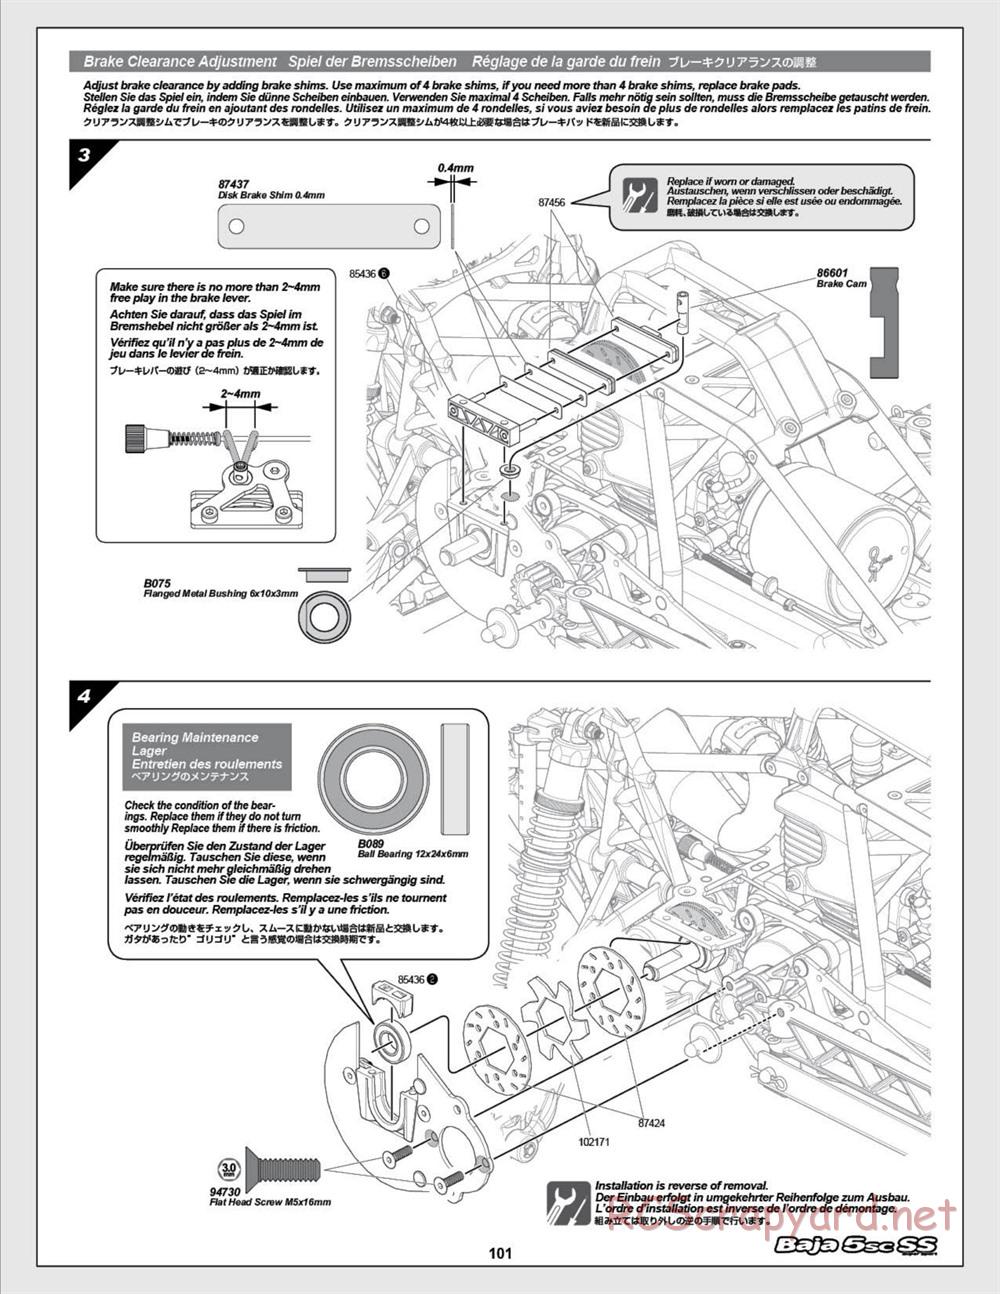 HPI - Baja 5SC SS - Exploded View - Page 101